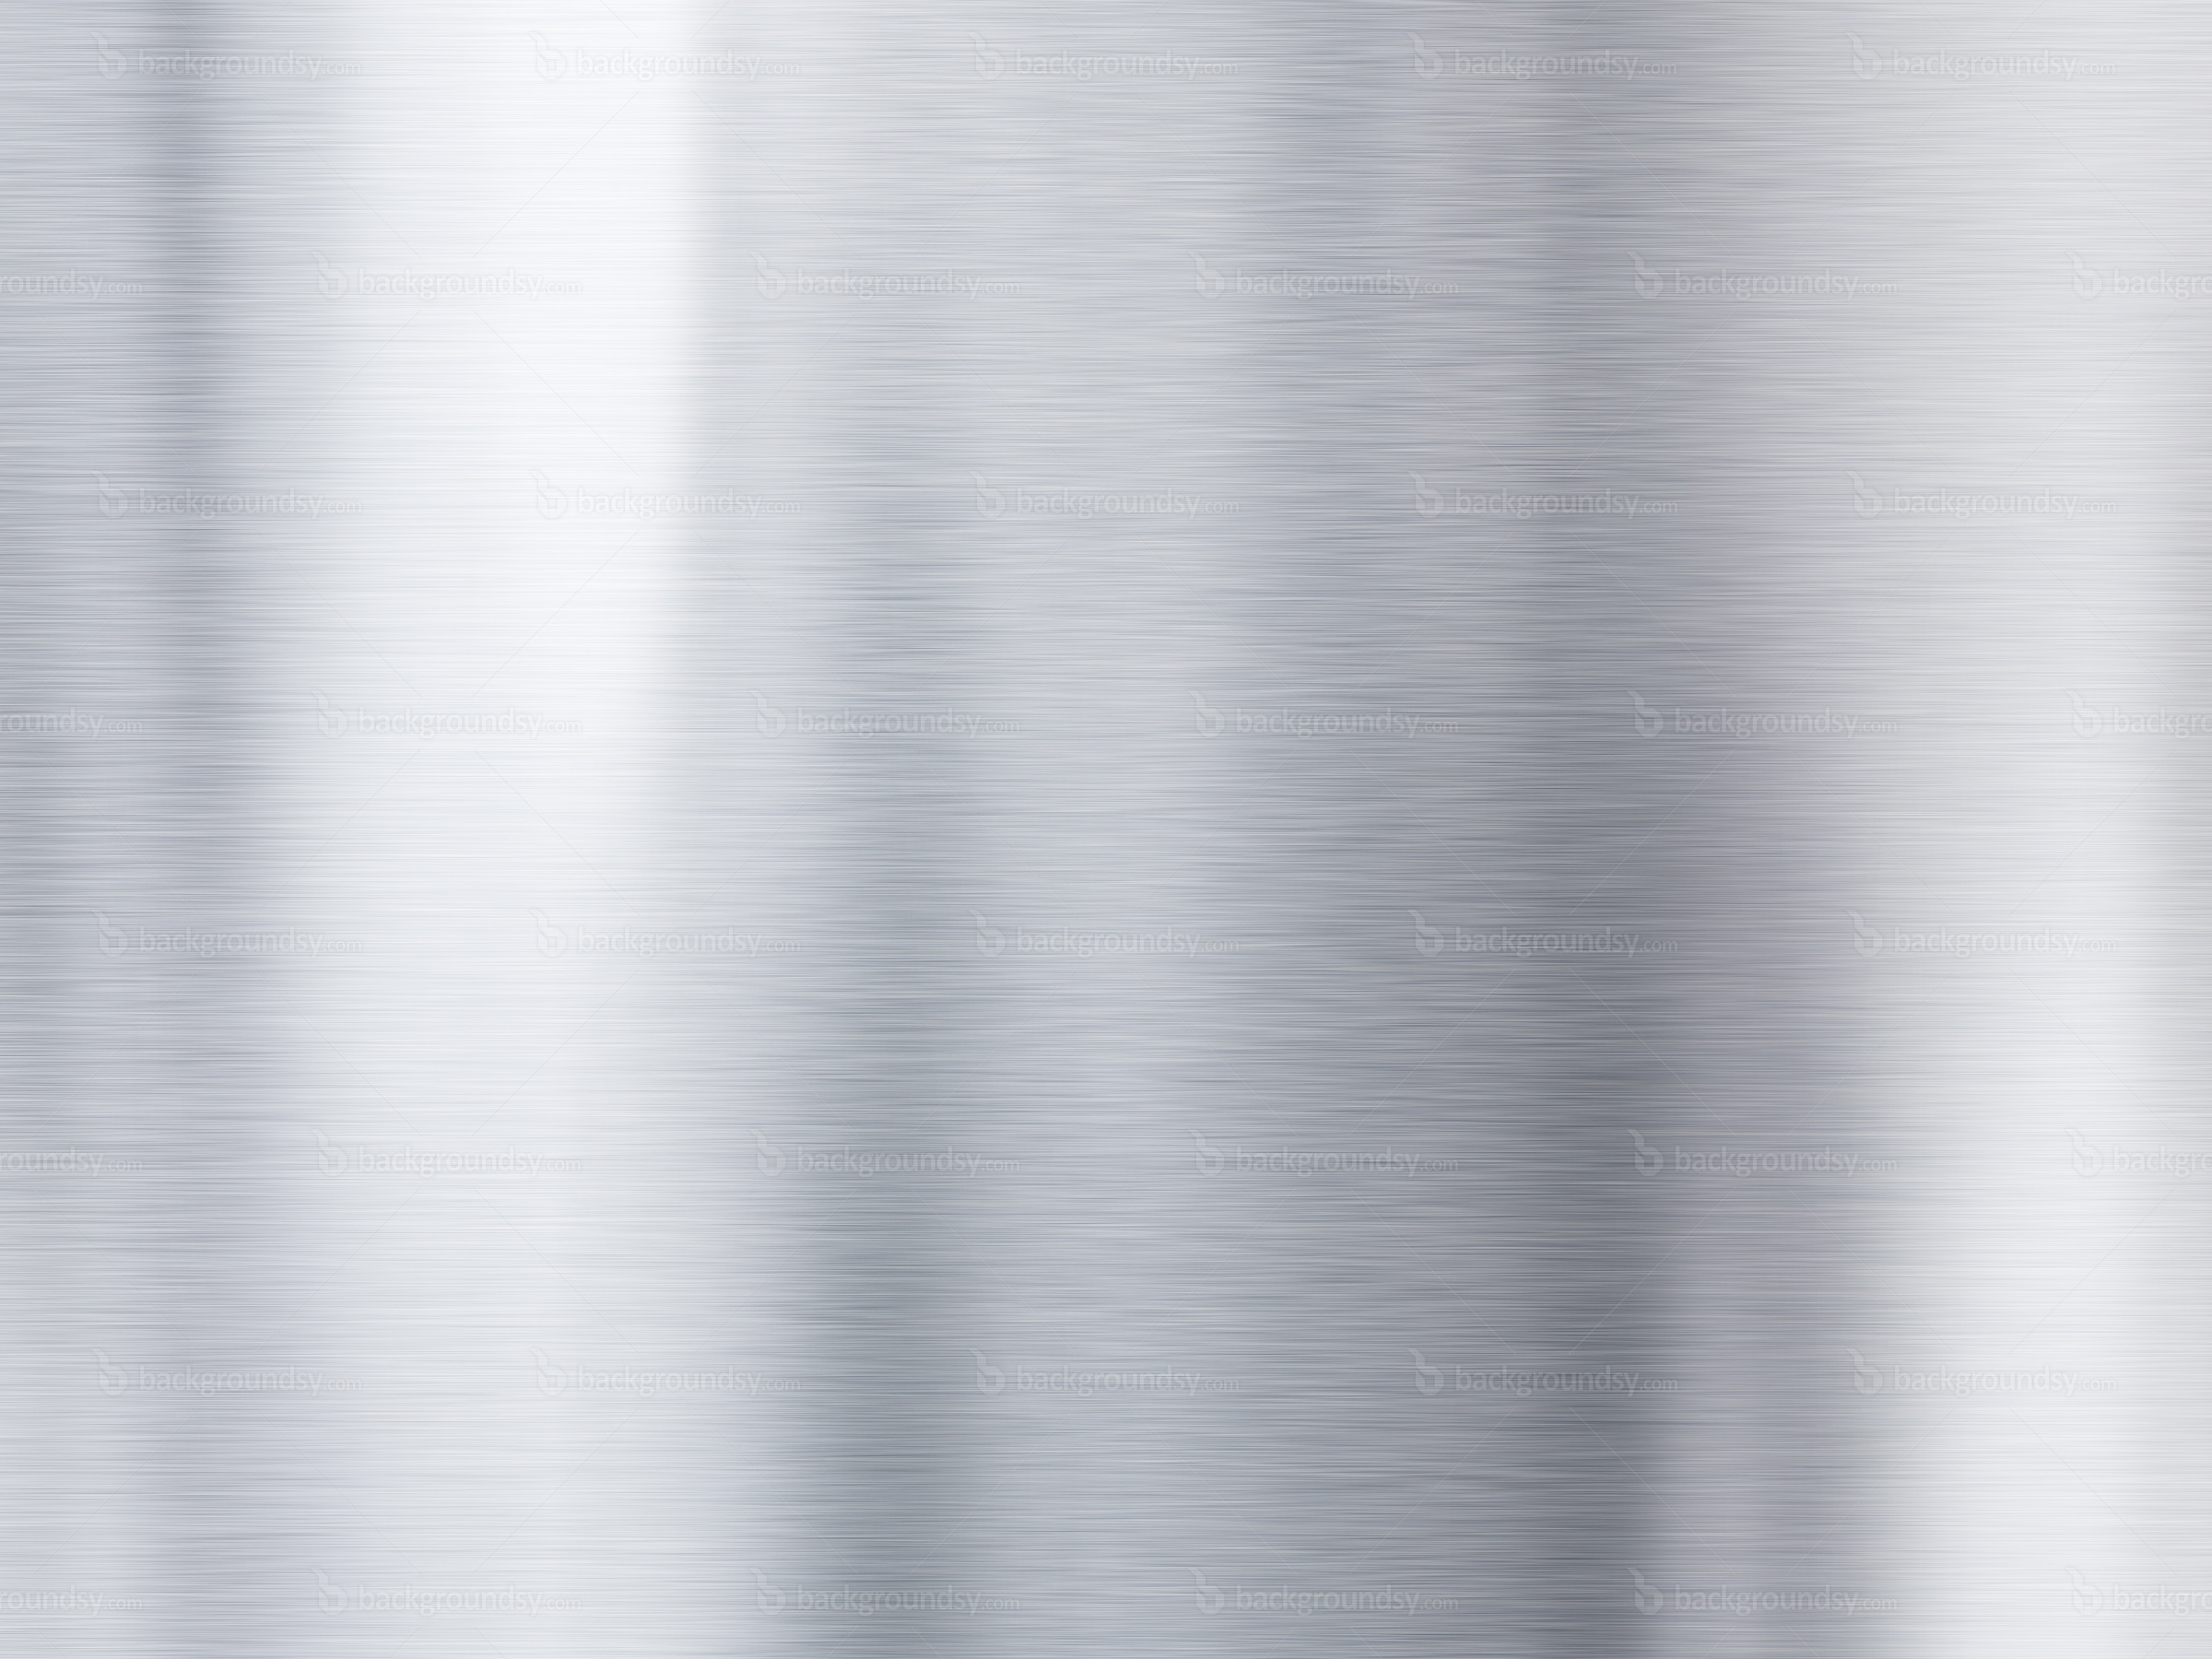 Free Download Silver Metal Texture Silver Background 2400x1800 For Your Desktop Mobile Tablet Explore 49 Textured Metallic Silver Wallpaper Metallic Blue Wallpaper 3d Metallic Wallpaper Silver Metallic Wallpaper